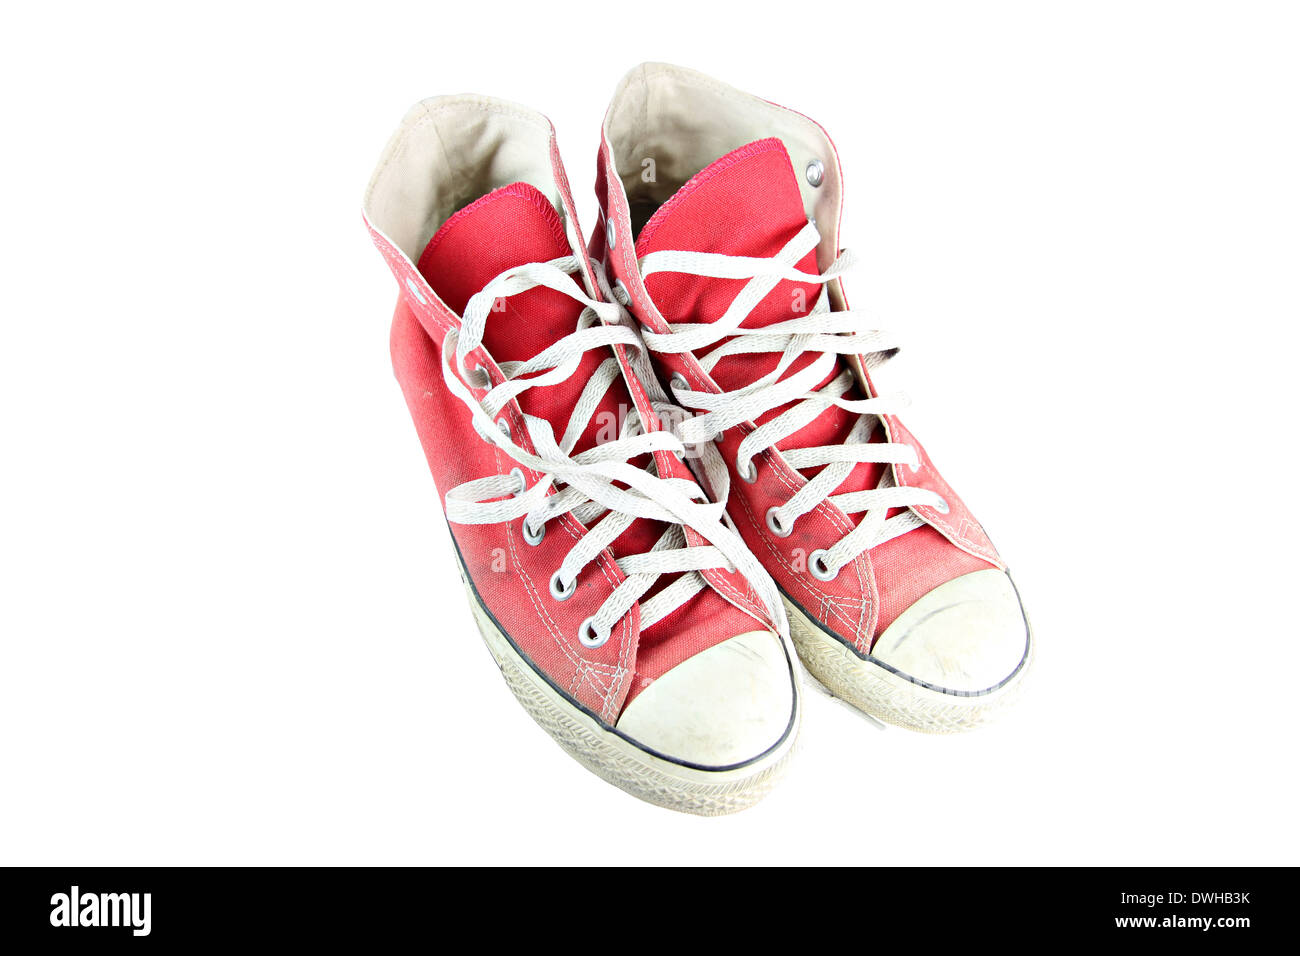 Dirty red sneaker isolated on white background Stock Photo - Alamy